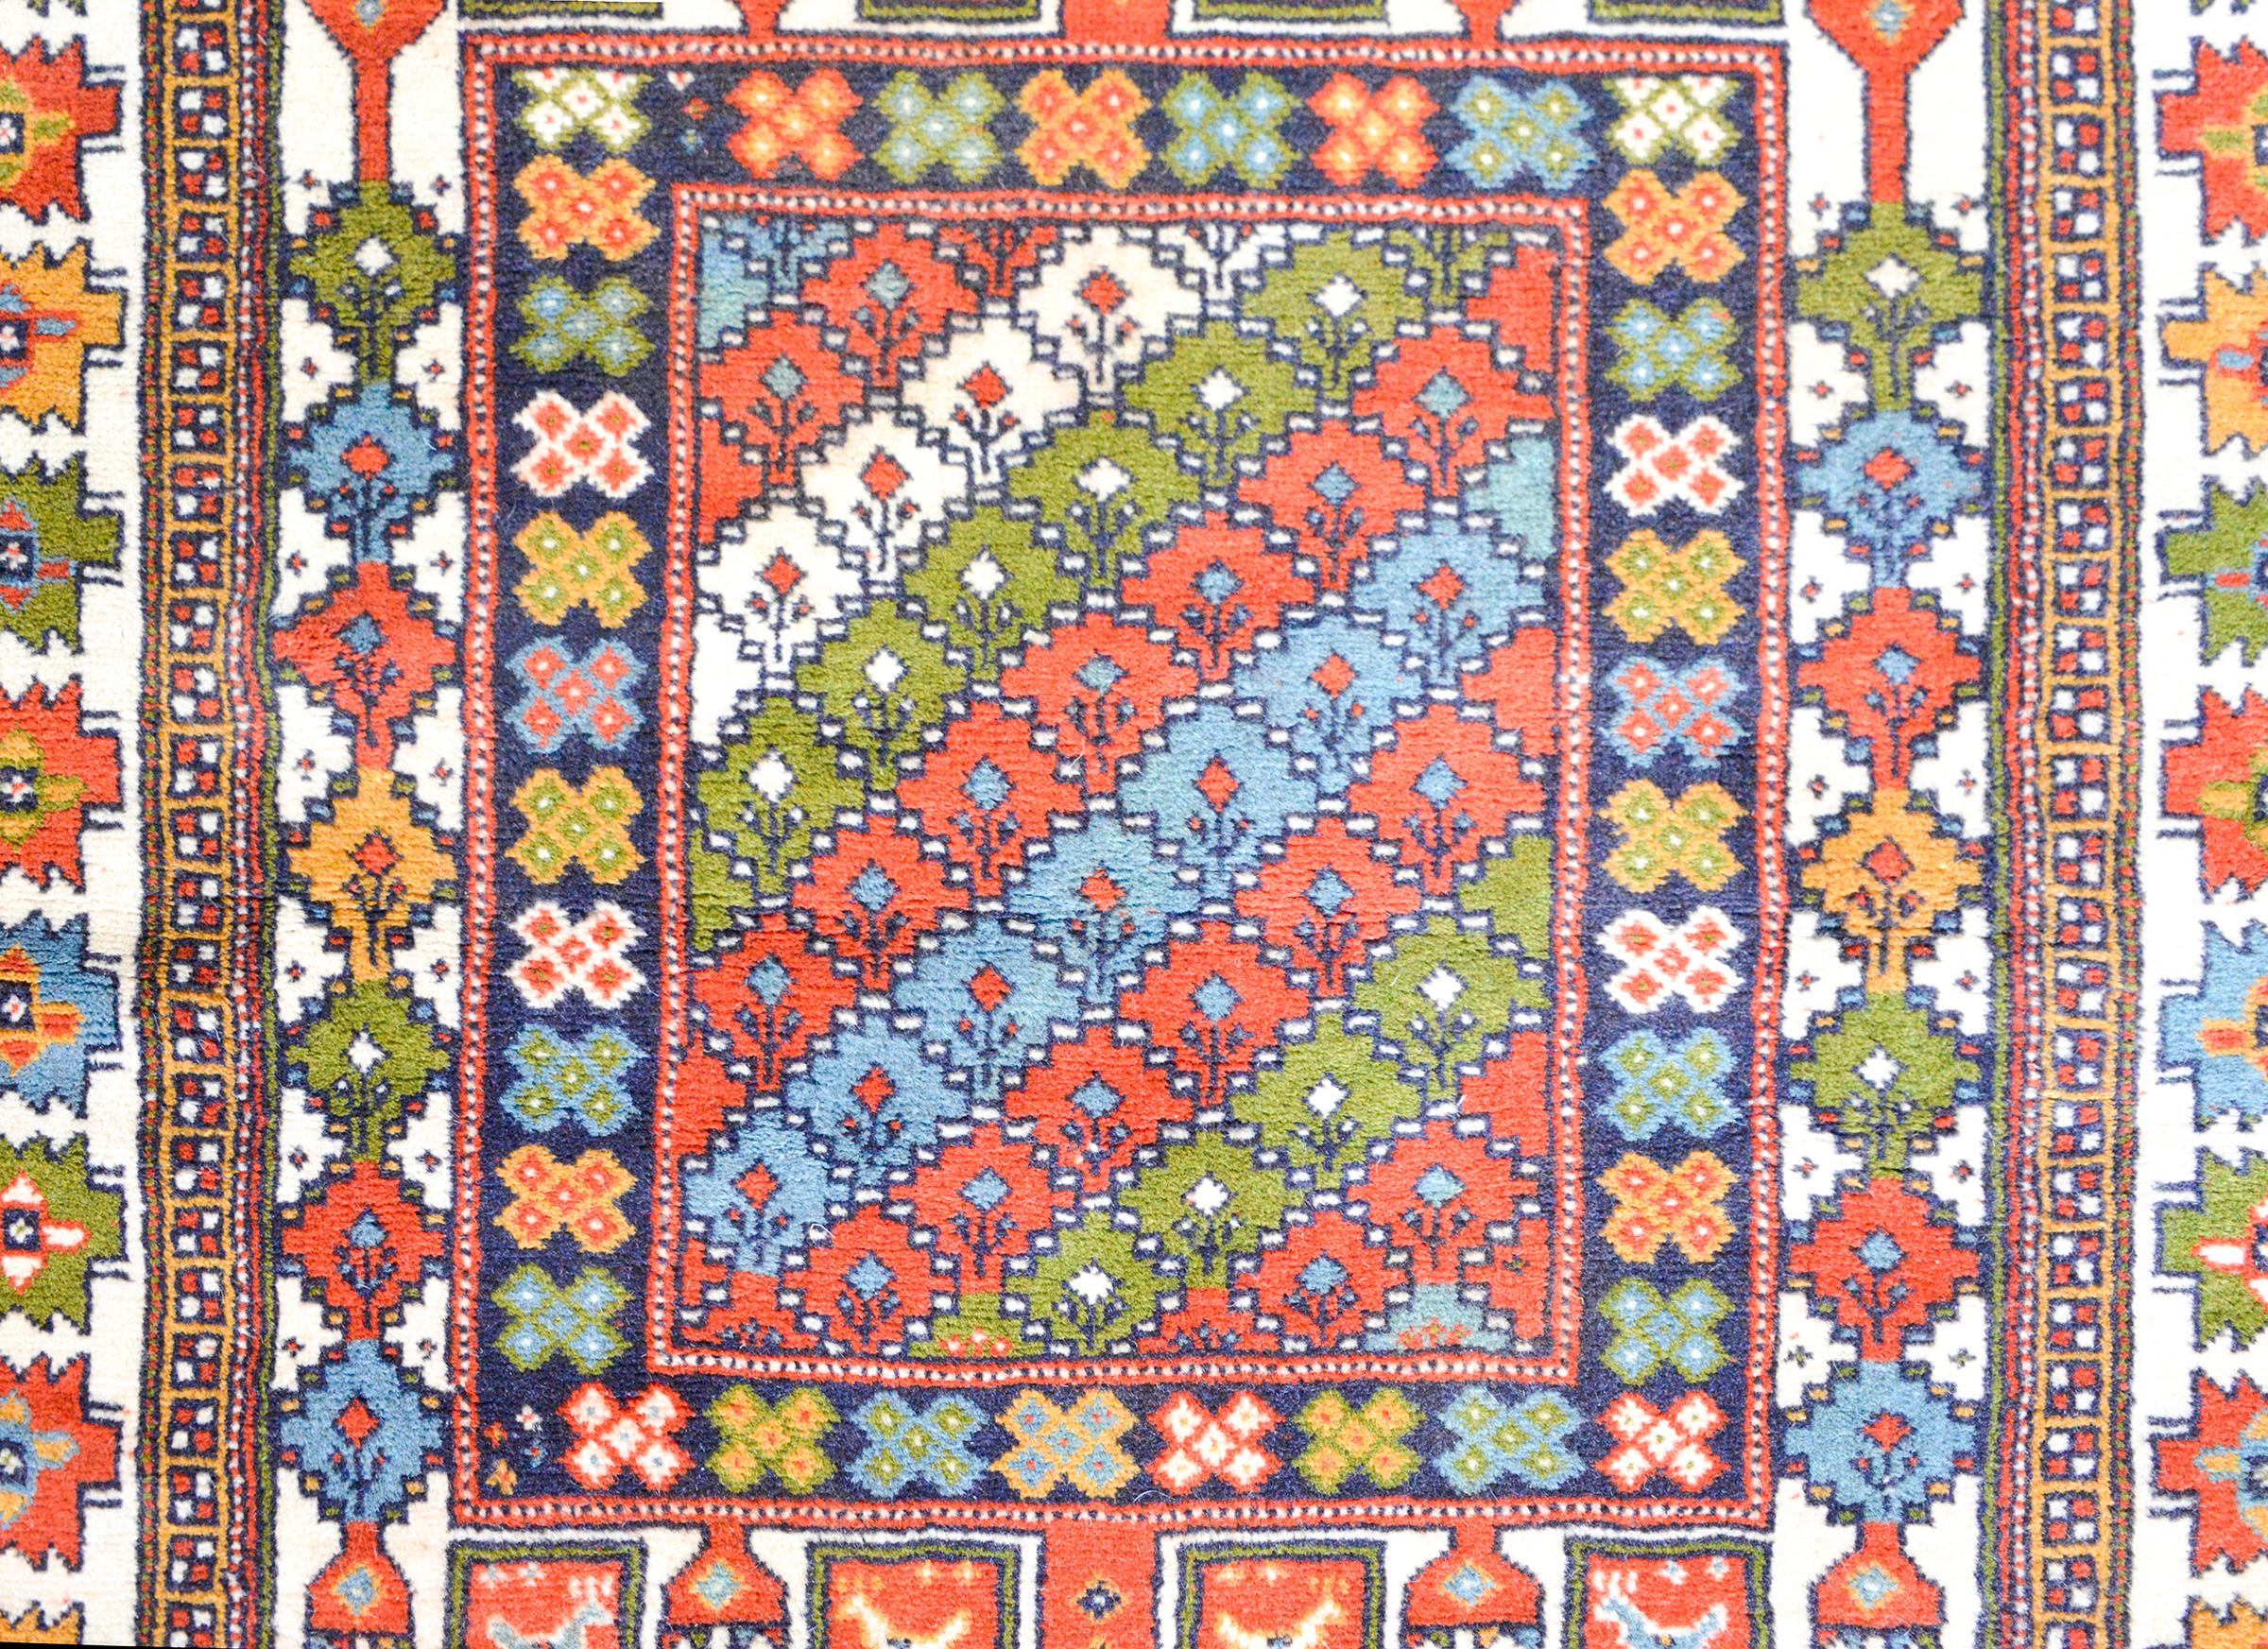 A stirking vintage Anatolian Turkish rug with a richly colored pattern of stylized flowers, chickens, and trees-of-life, all woven in bright corals, greens, golds, and blues, and surrounded by a border with more stylized flowers.